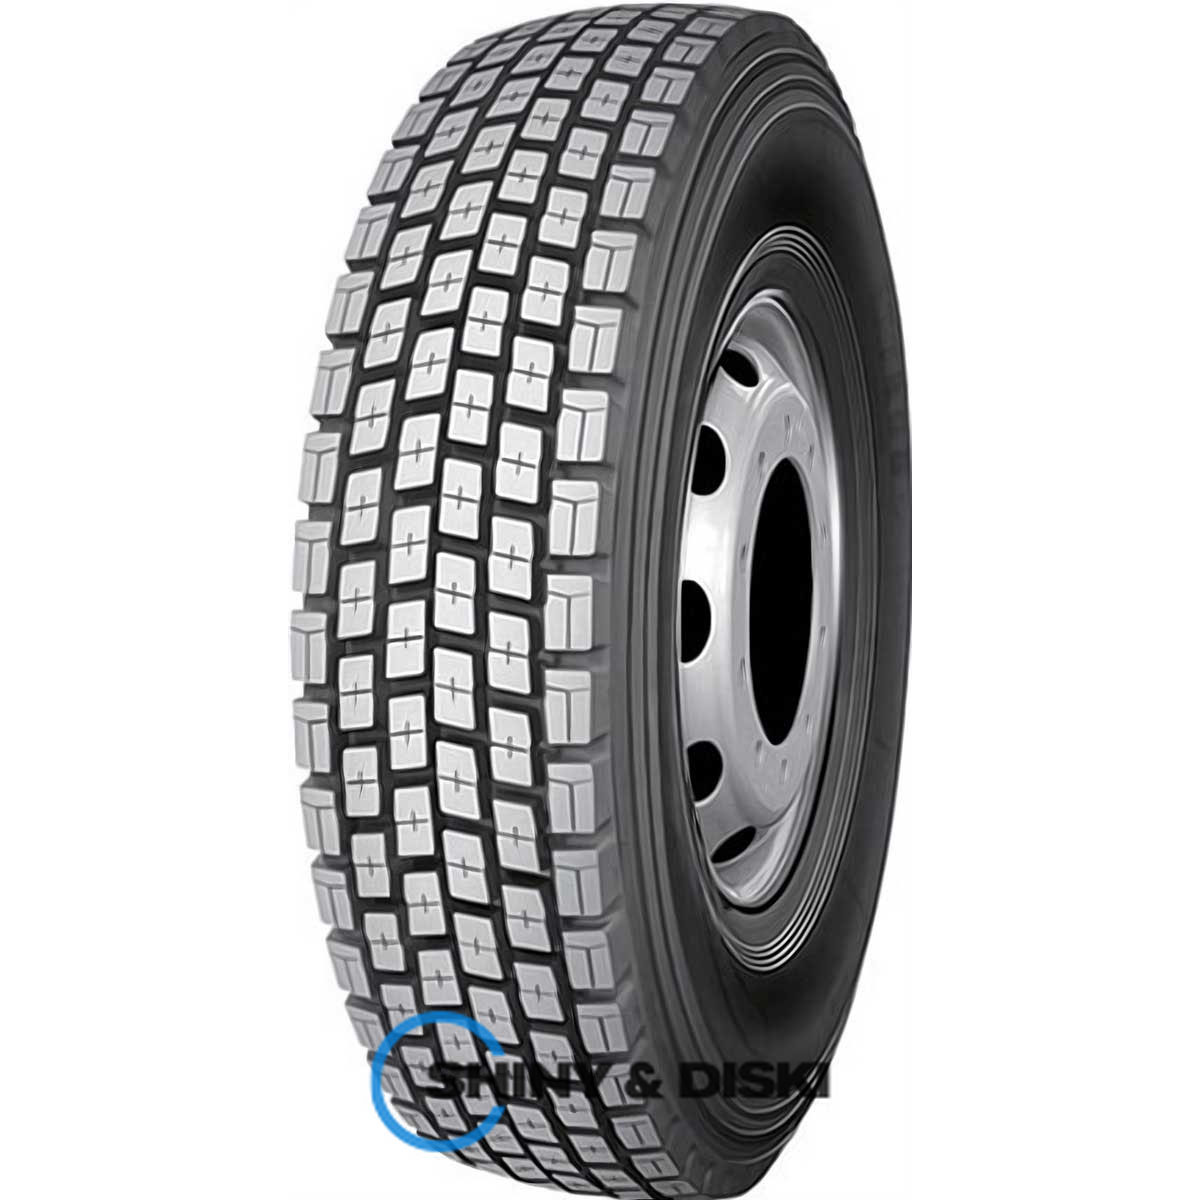 taitong hs102 (ведущая ось) 315/80 r22.5 157/153l